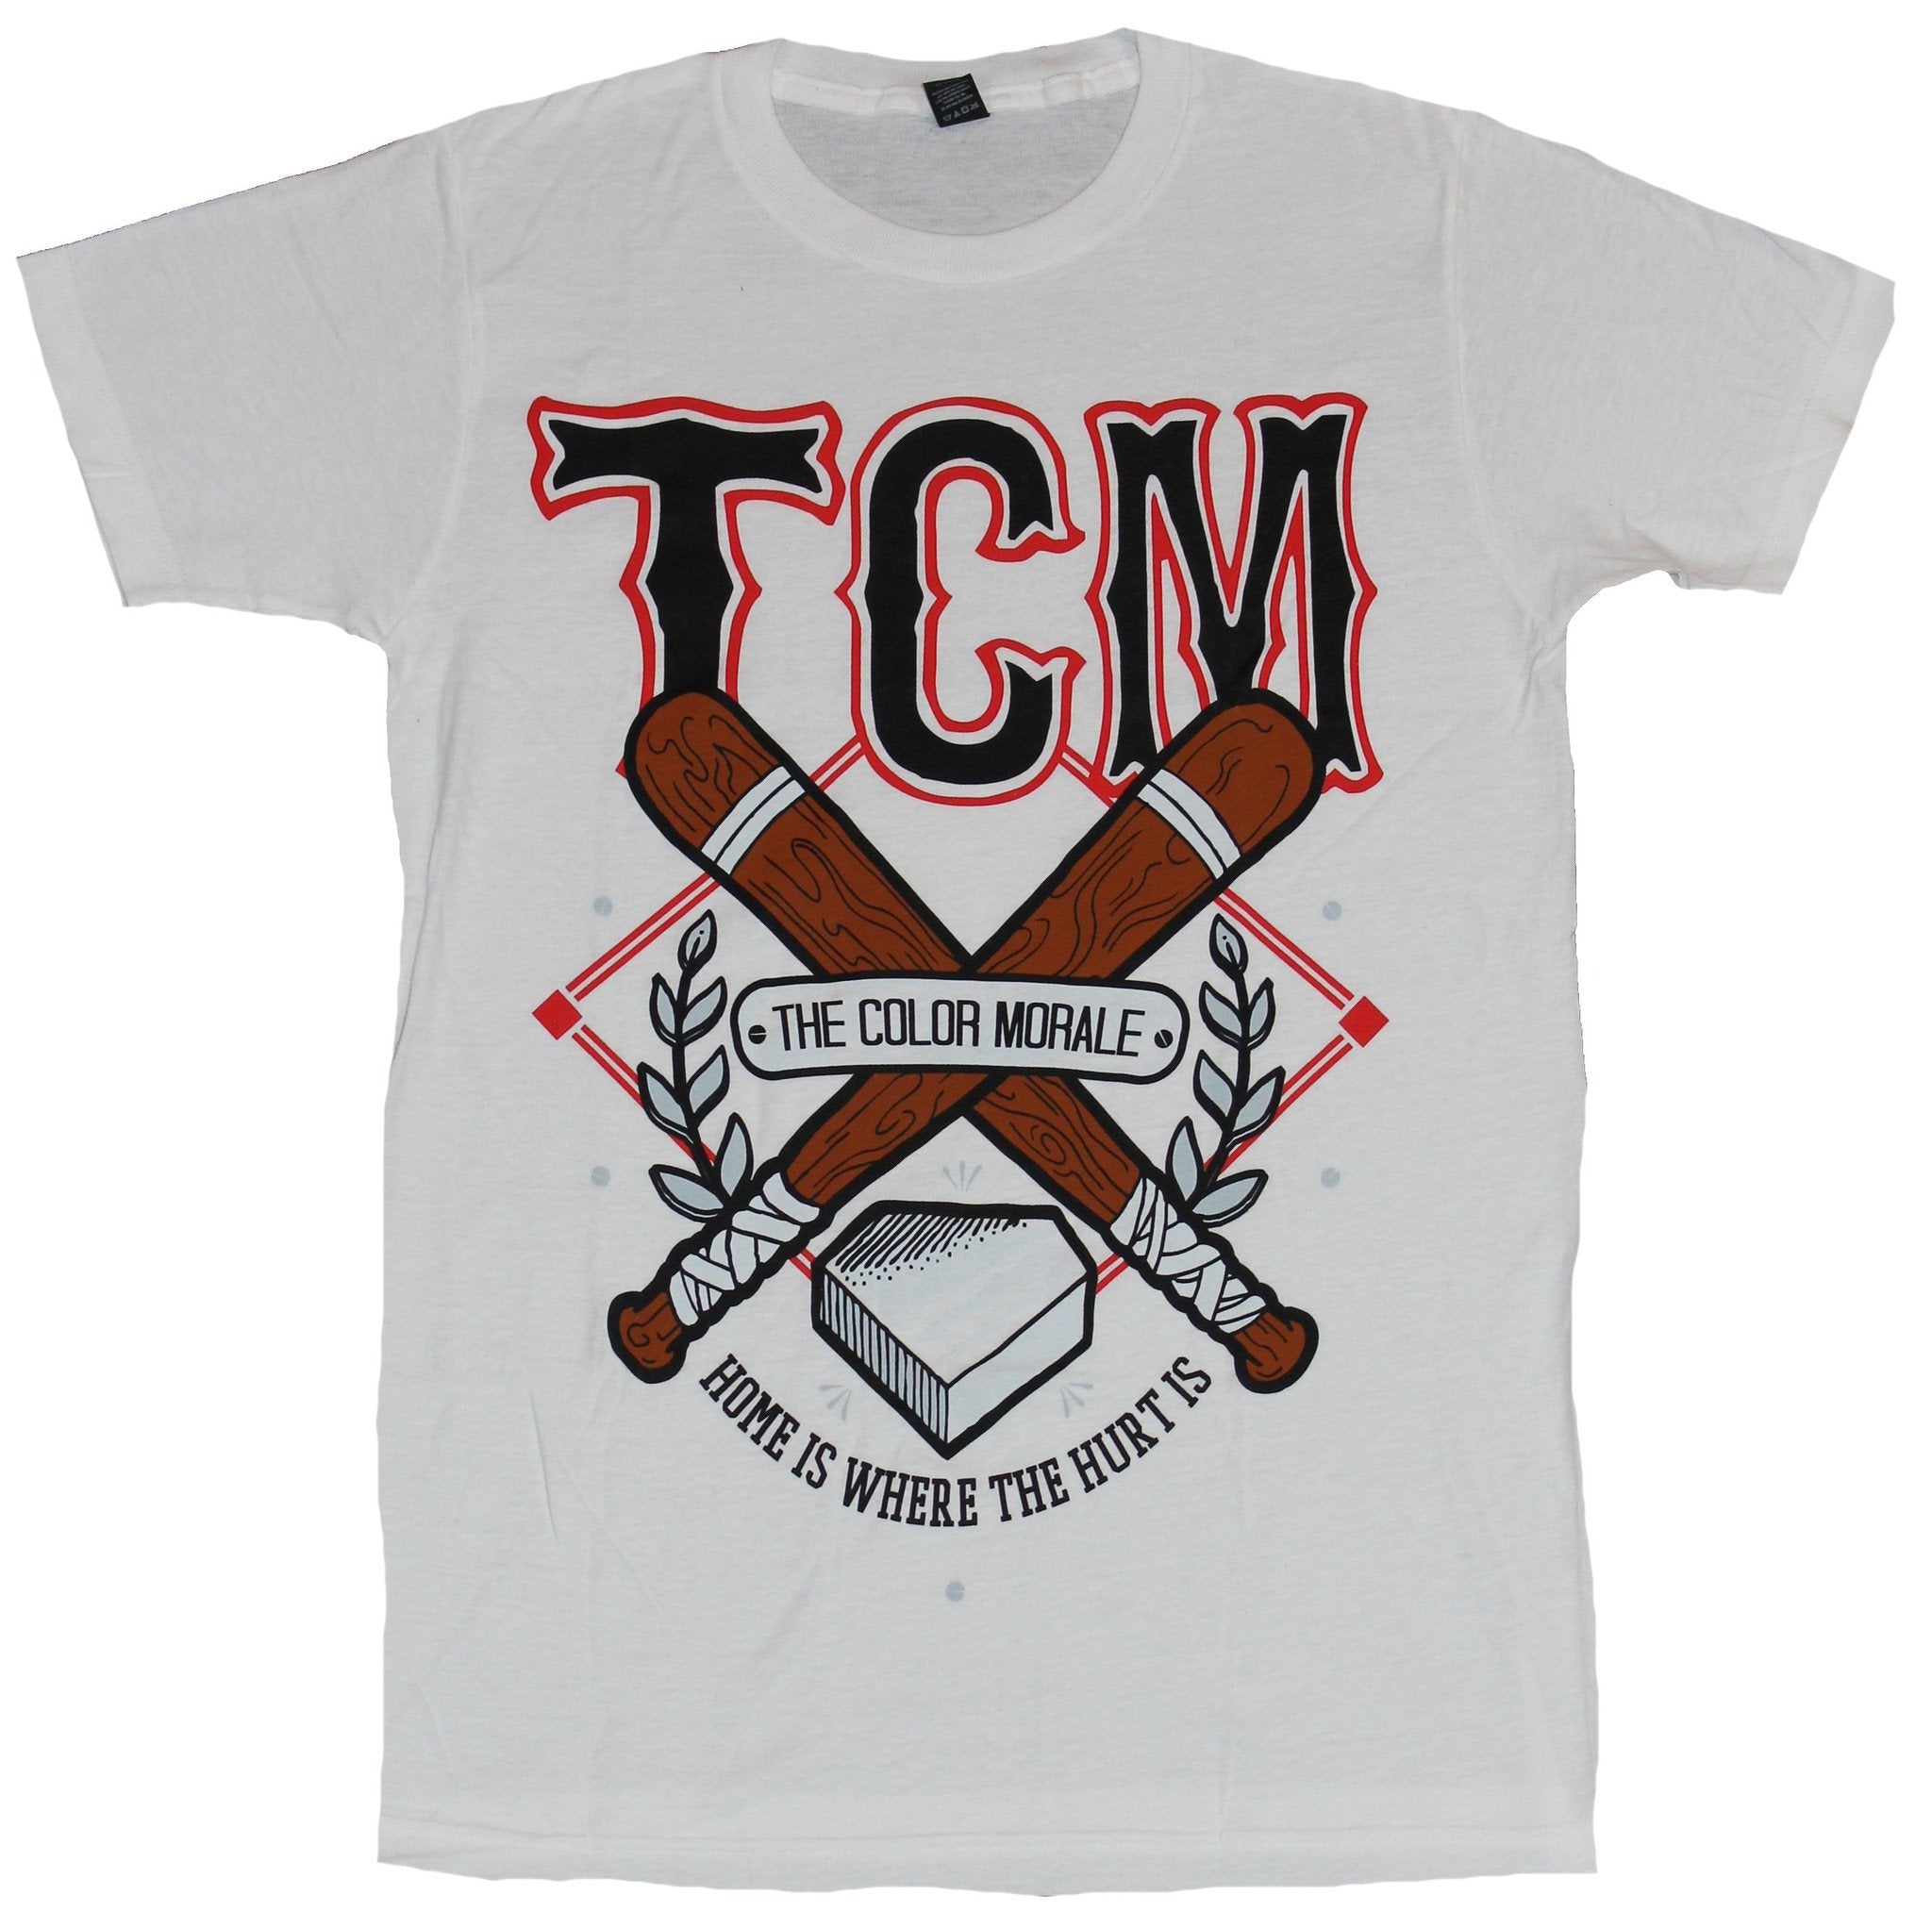 The Color Morale Mens T-Shirt - Home is Where the Hurt Is Crossed Bats Image